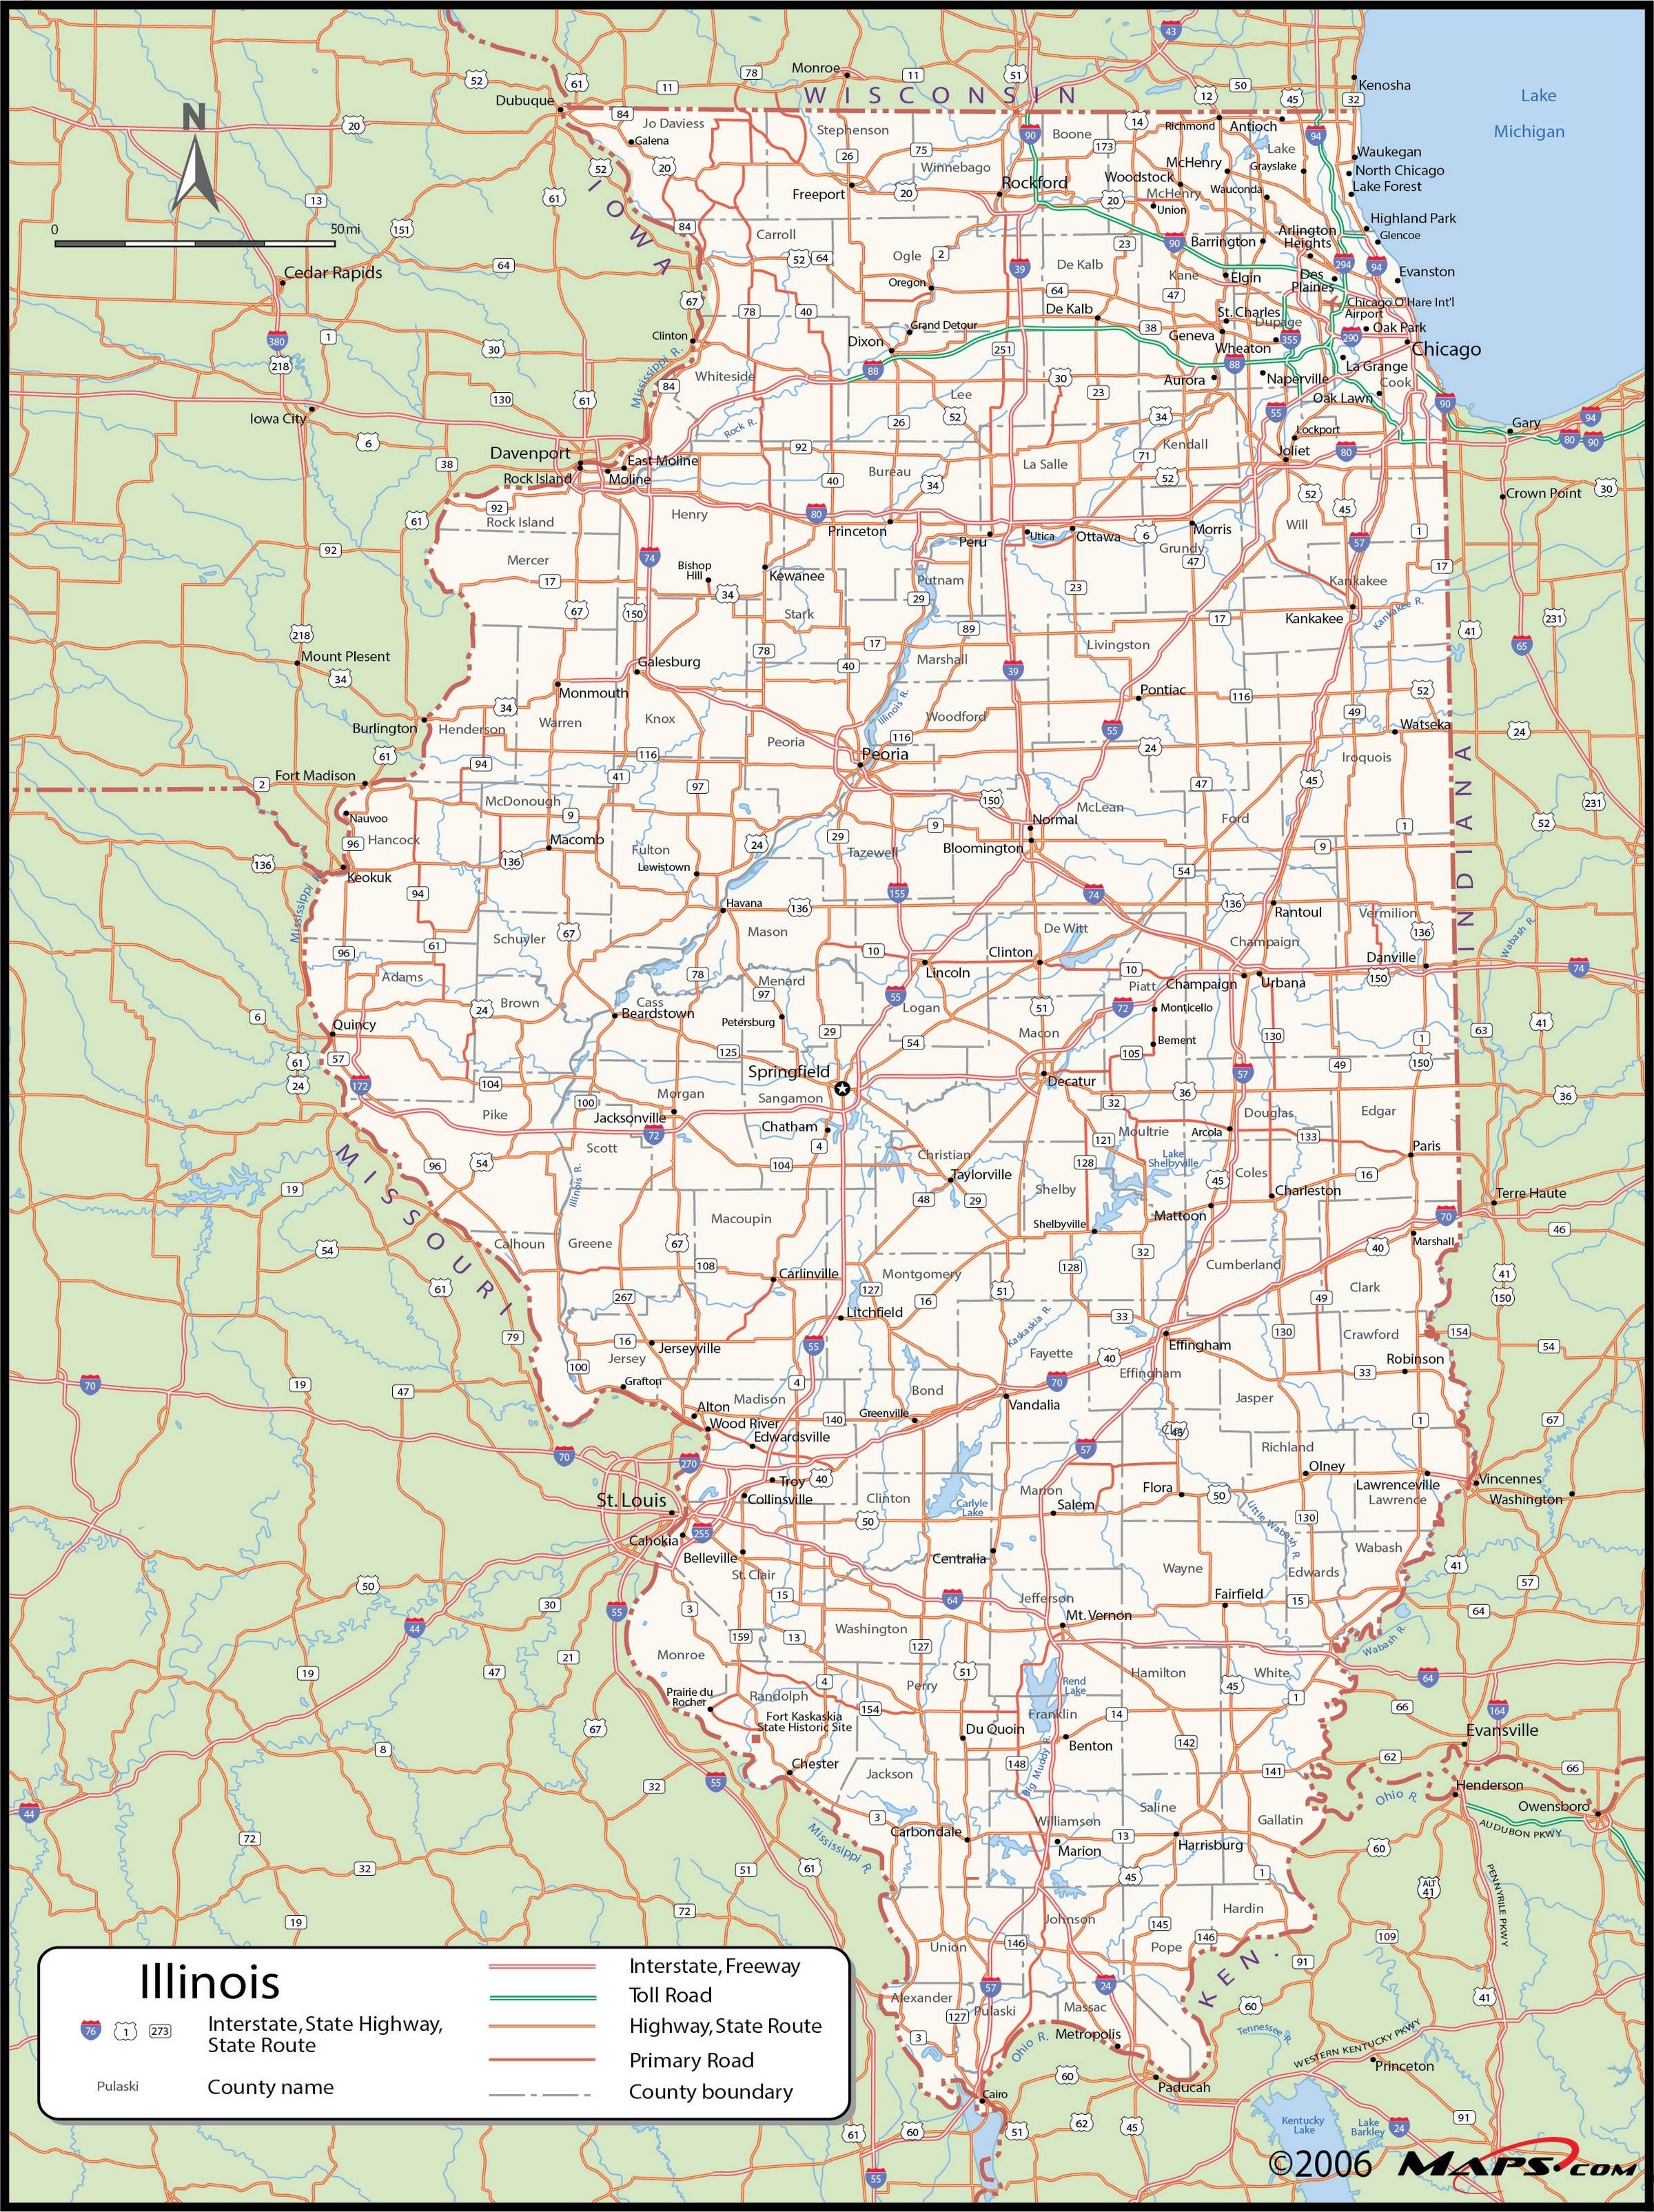 Illinois County Map Il Counties Map Of Illinois - kulturaupice